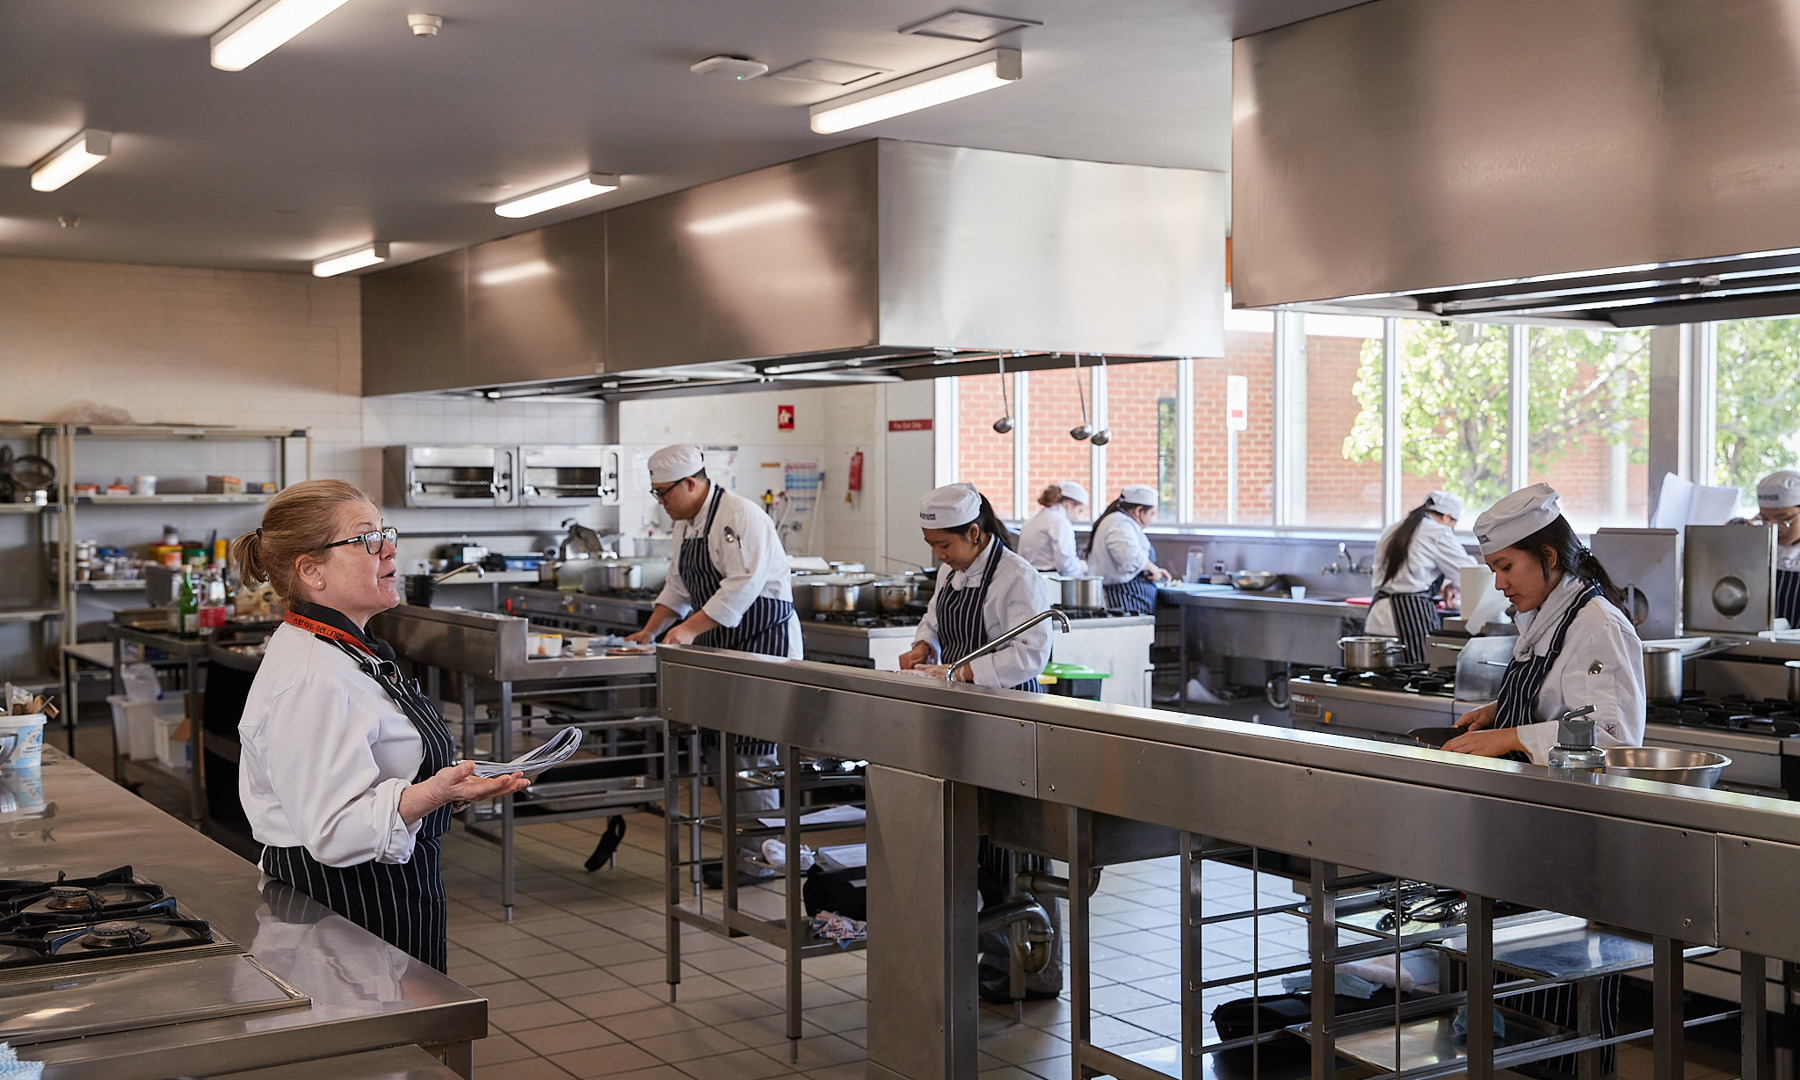 Preston hospitality cookery students preparing food in kitchen facility while under instruction.